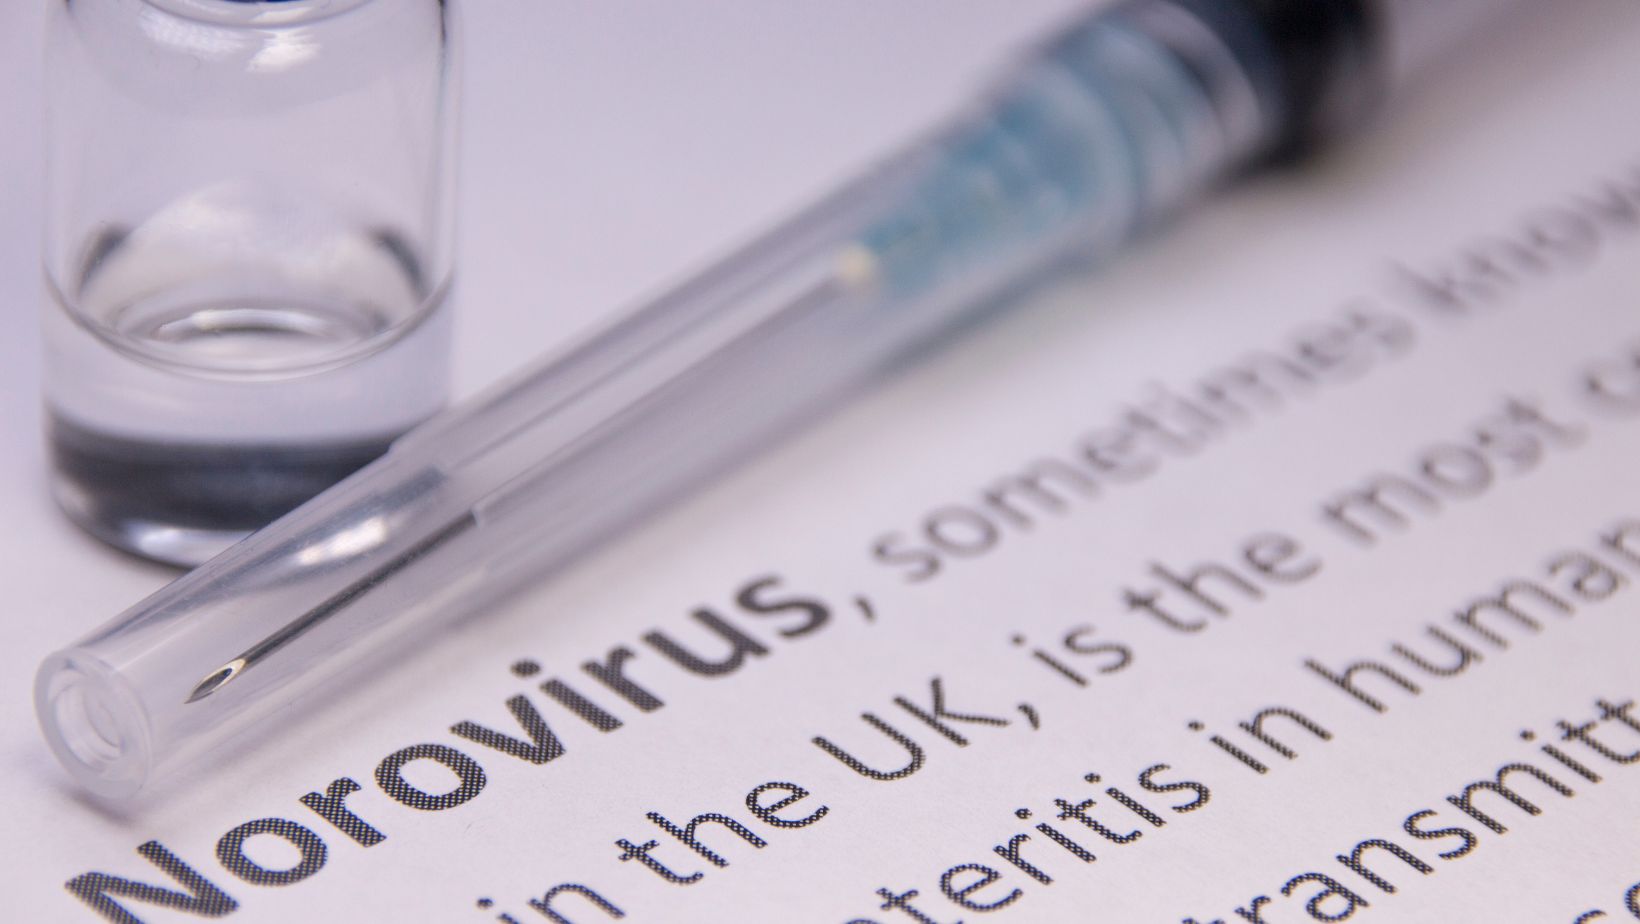 norovirus causes an illness that is commonly misdiagnosed as